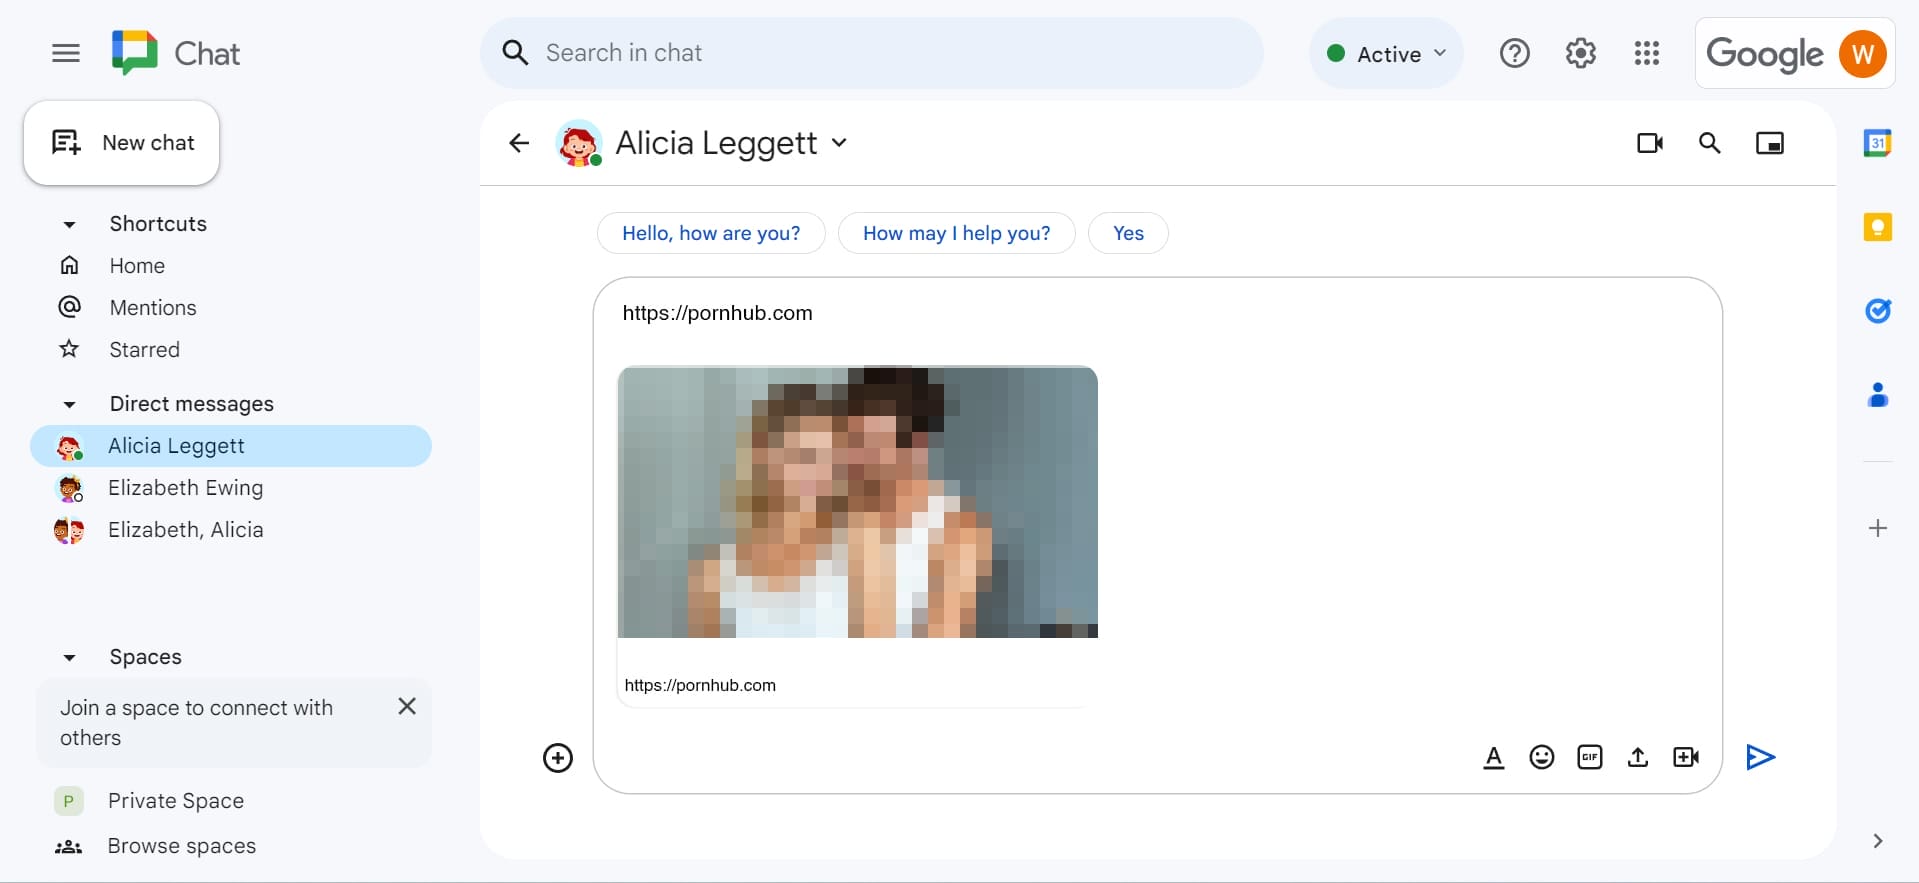 Link Preview in Google Chat